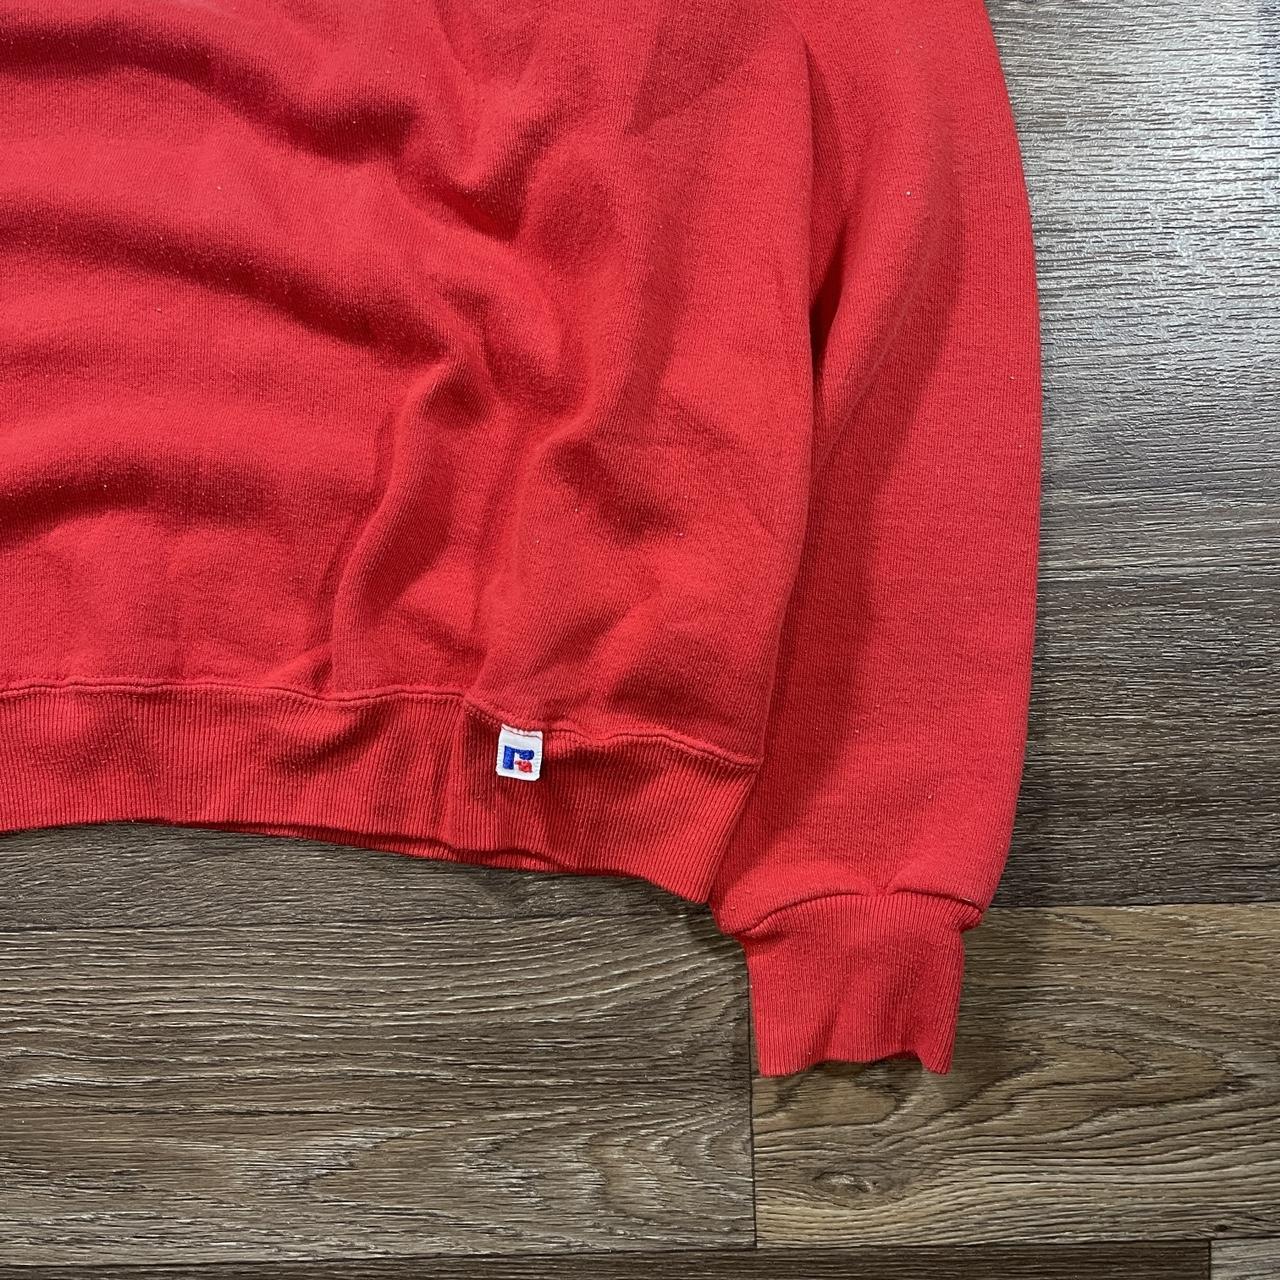 Russell Athletic Men's Red and White Sweatshirt (3)